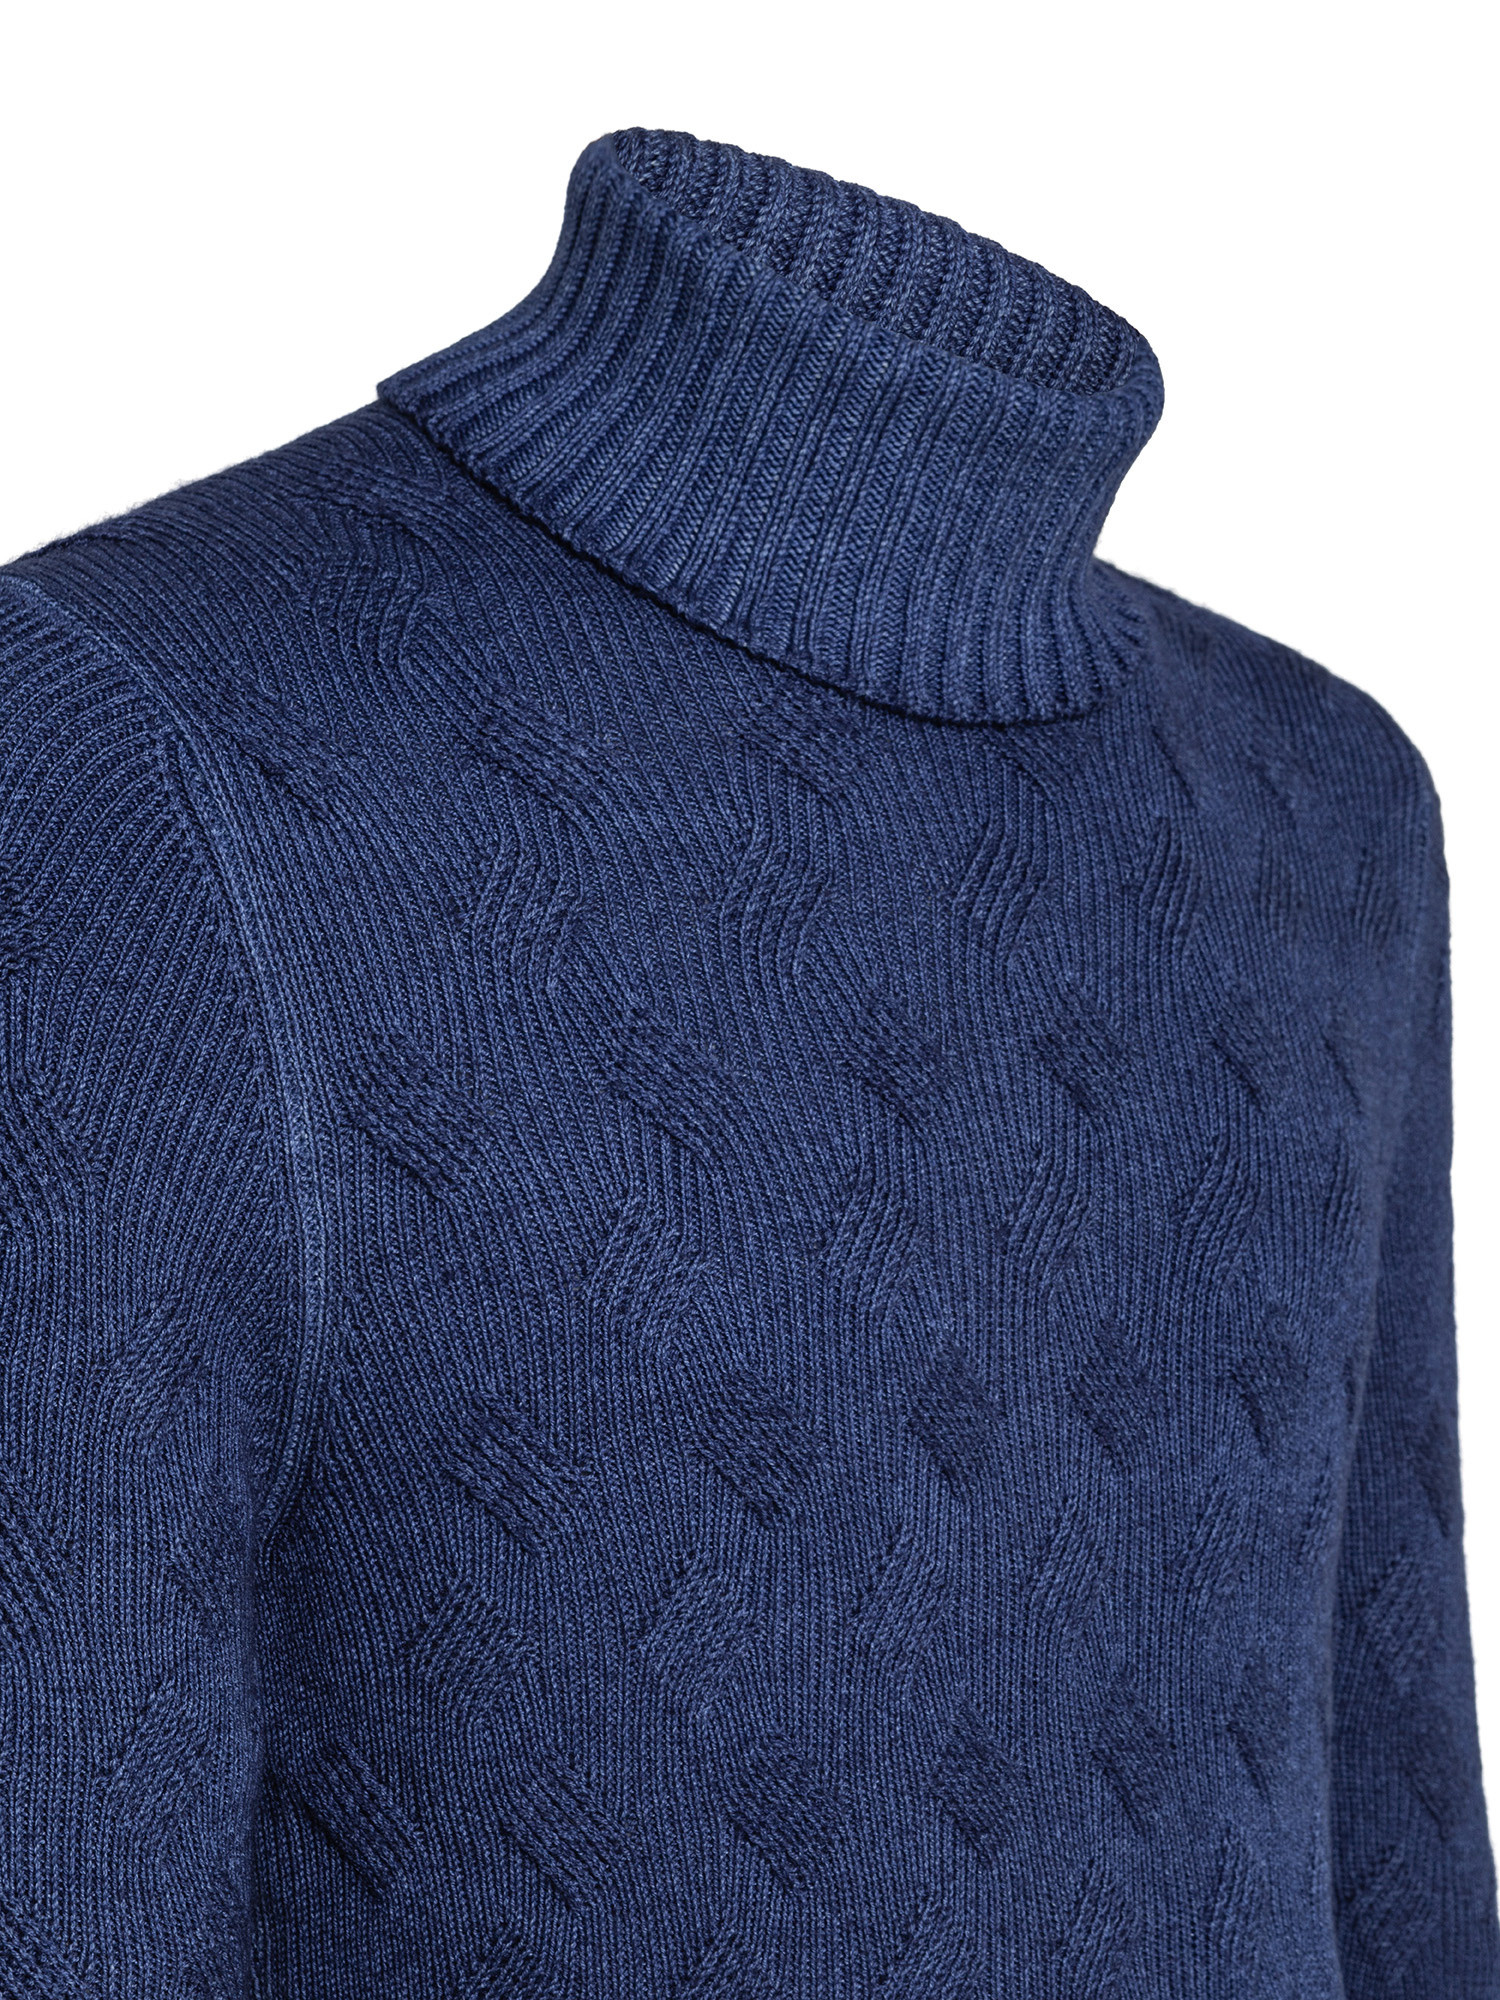 Cable knit 2-ply merino wool turtleneck, Blue, large image number 2